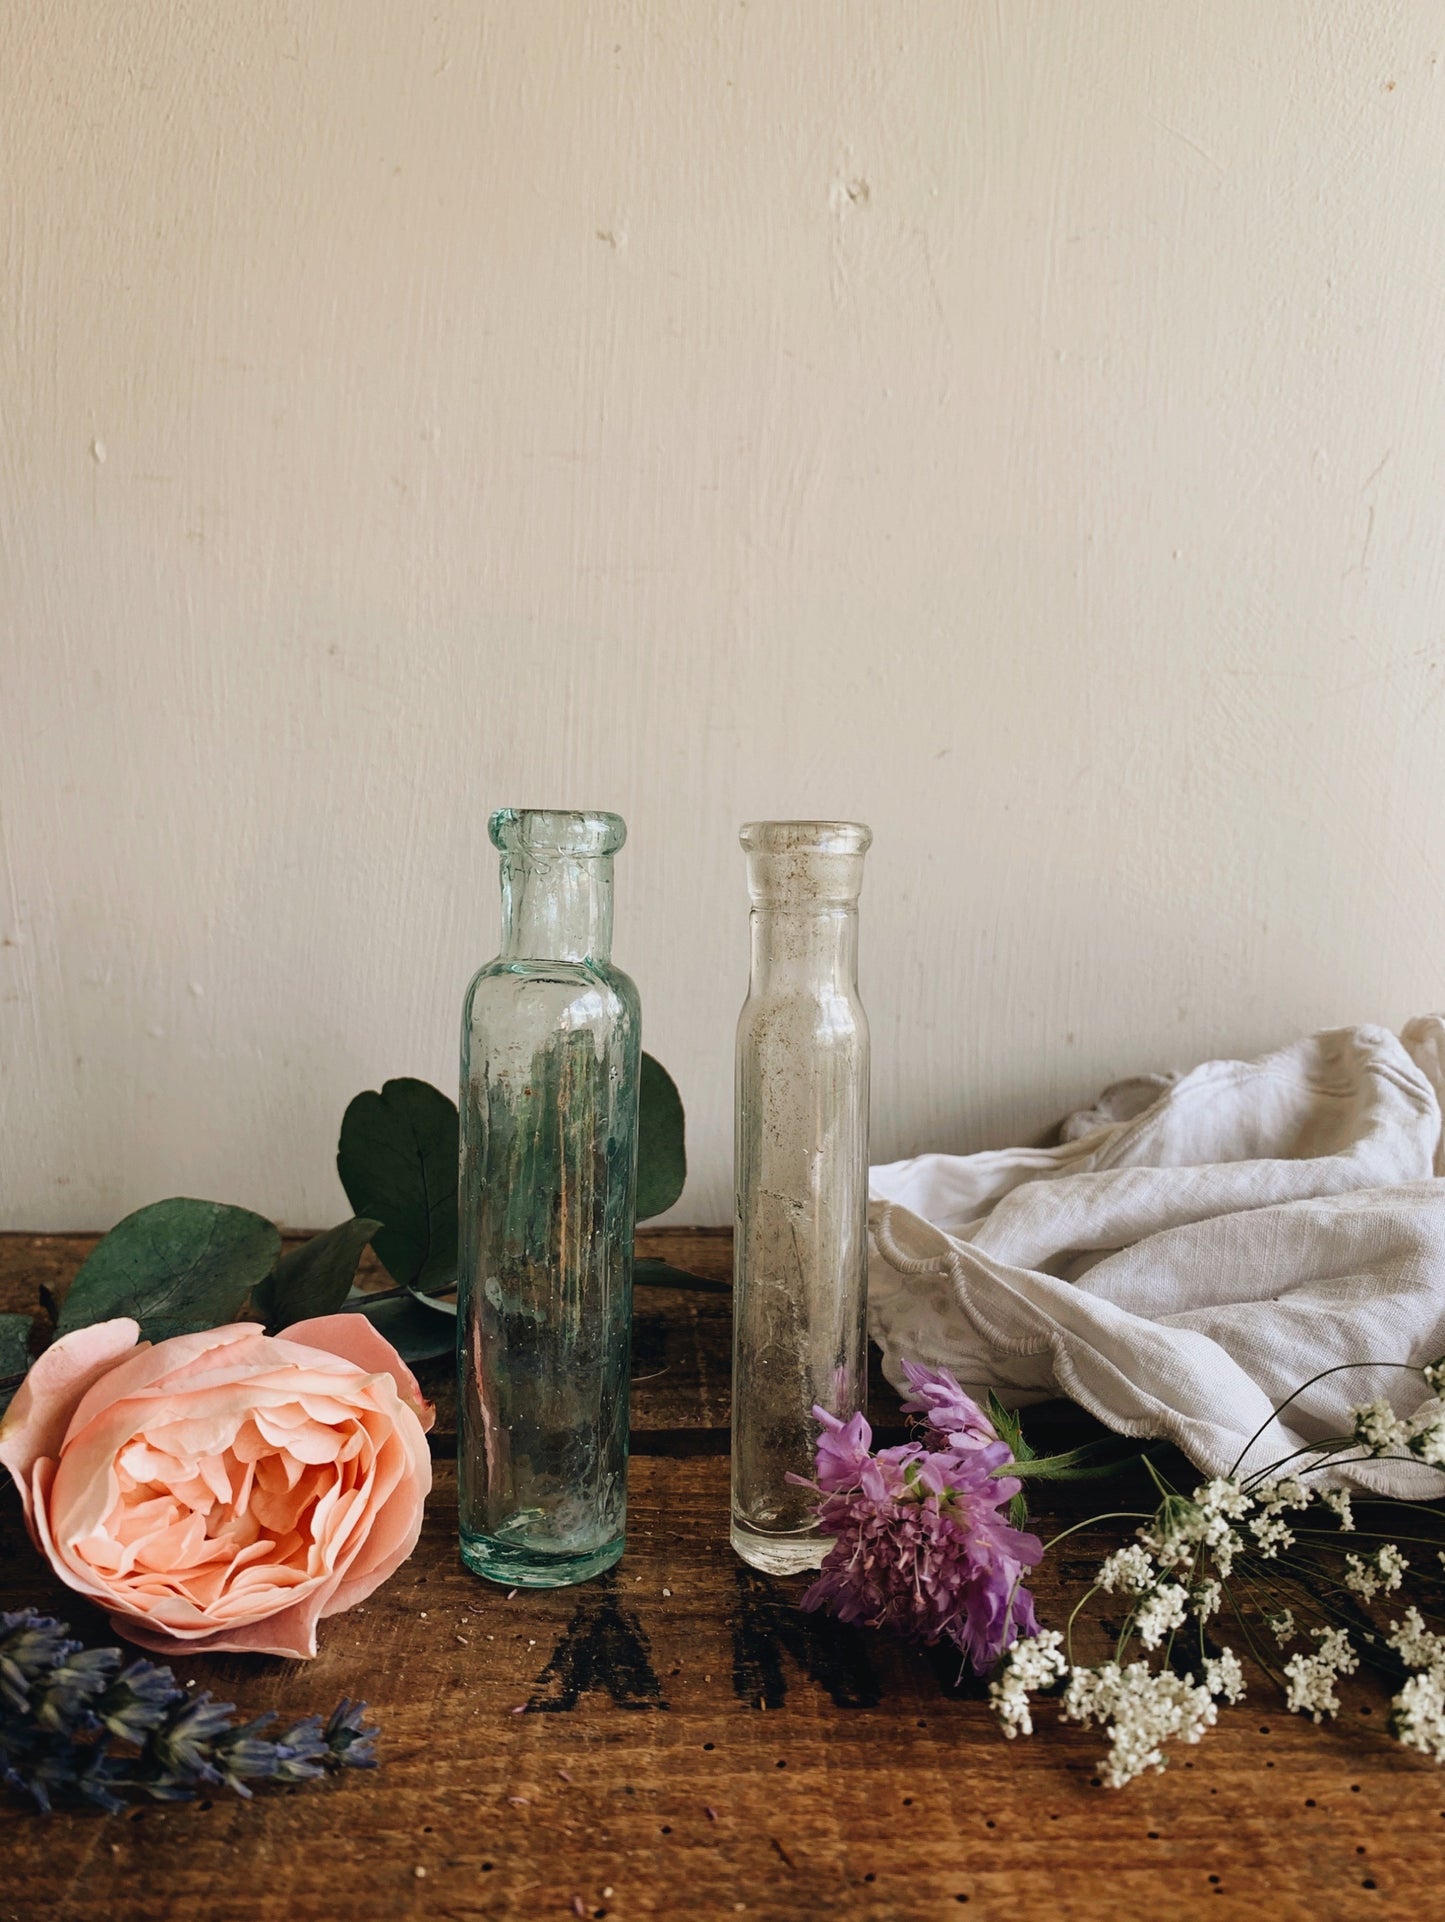 Two Rustic Vintage Apothecary Bottles